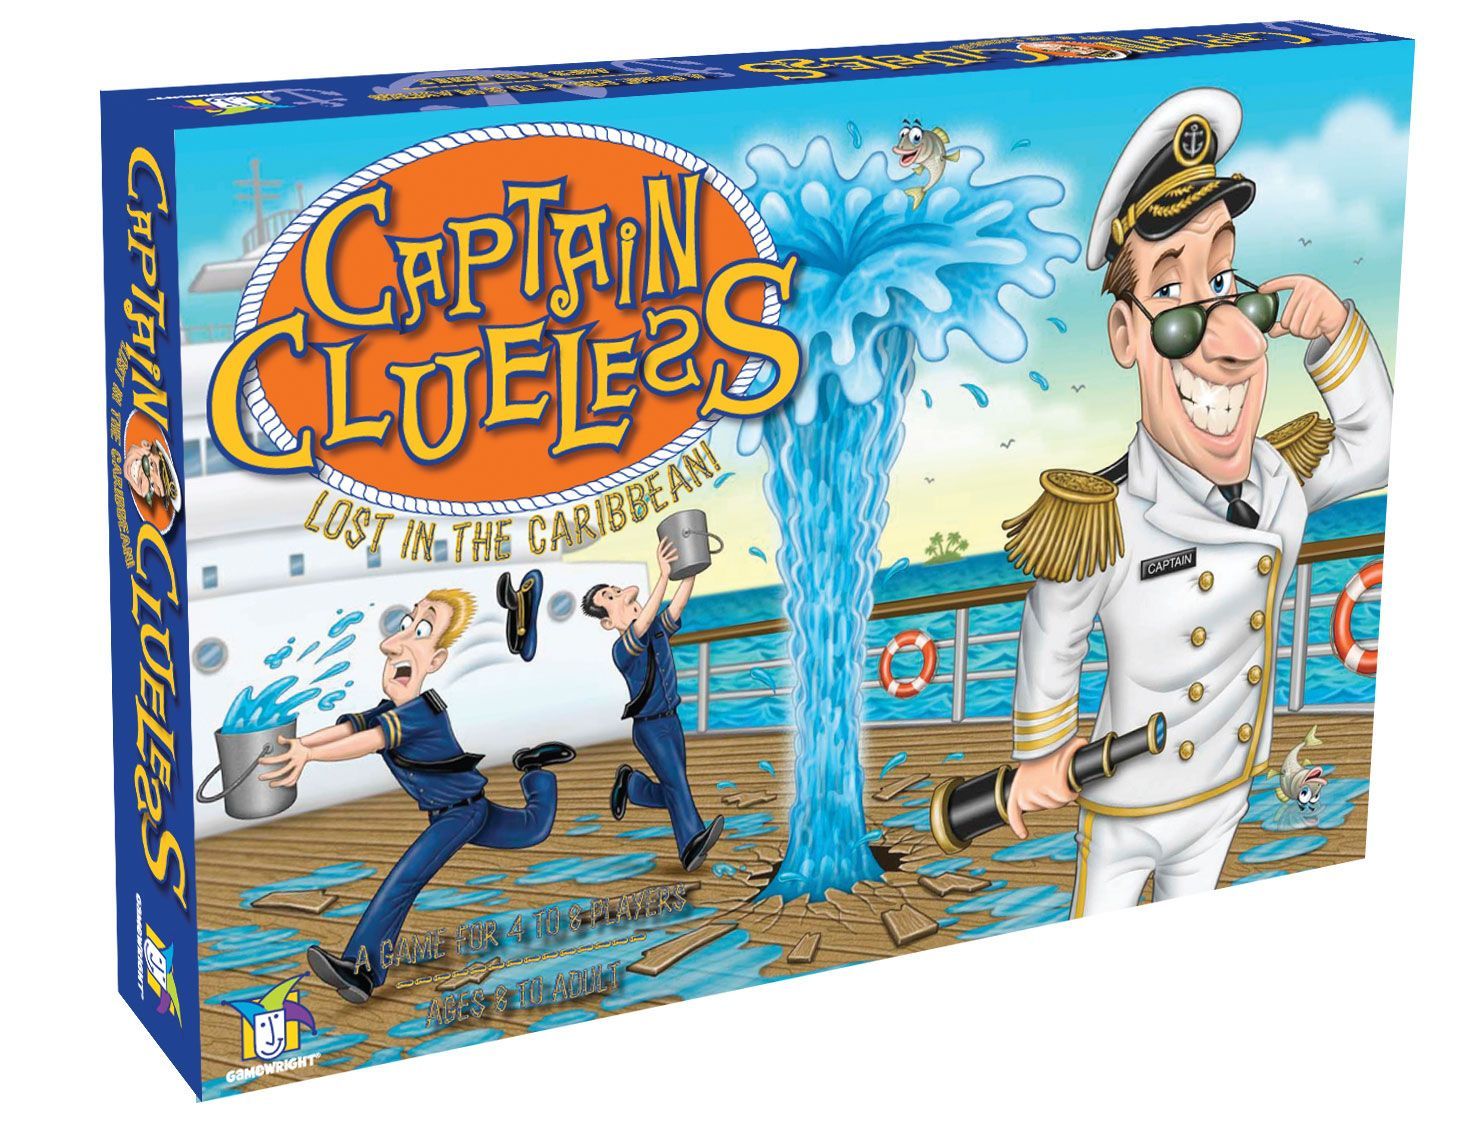 Captain Clueless: Lost in the Caribbean